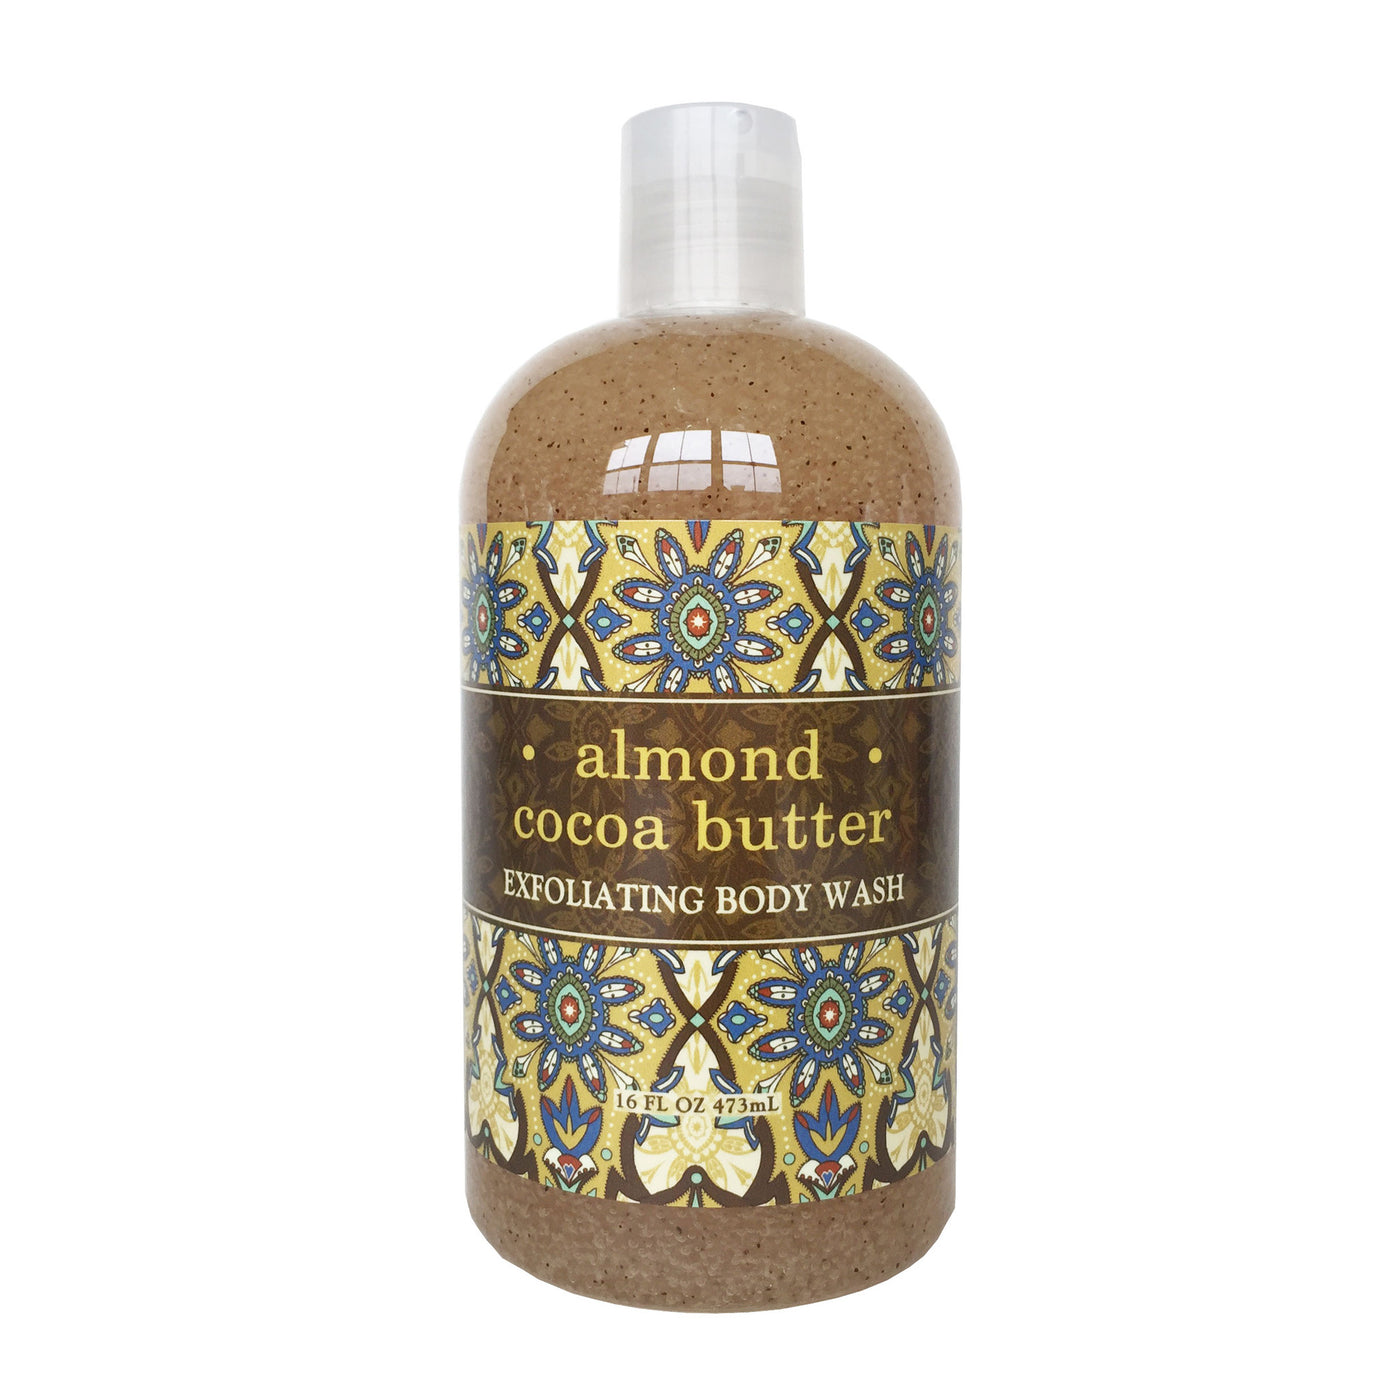 Almond Cocoa Butter Exfoliating Body Wash by Greenwich Bay Trading Co